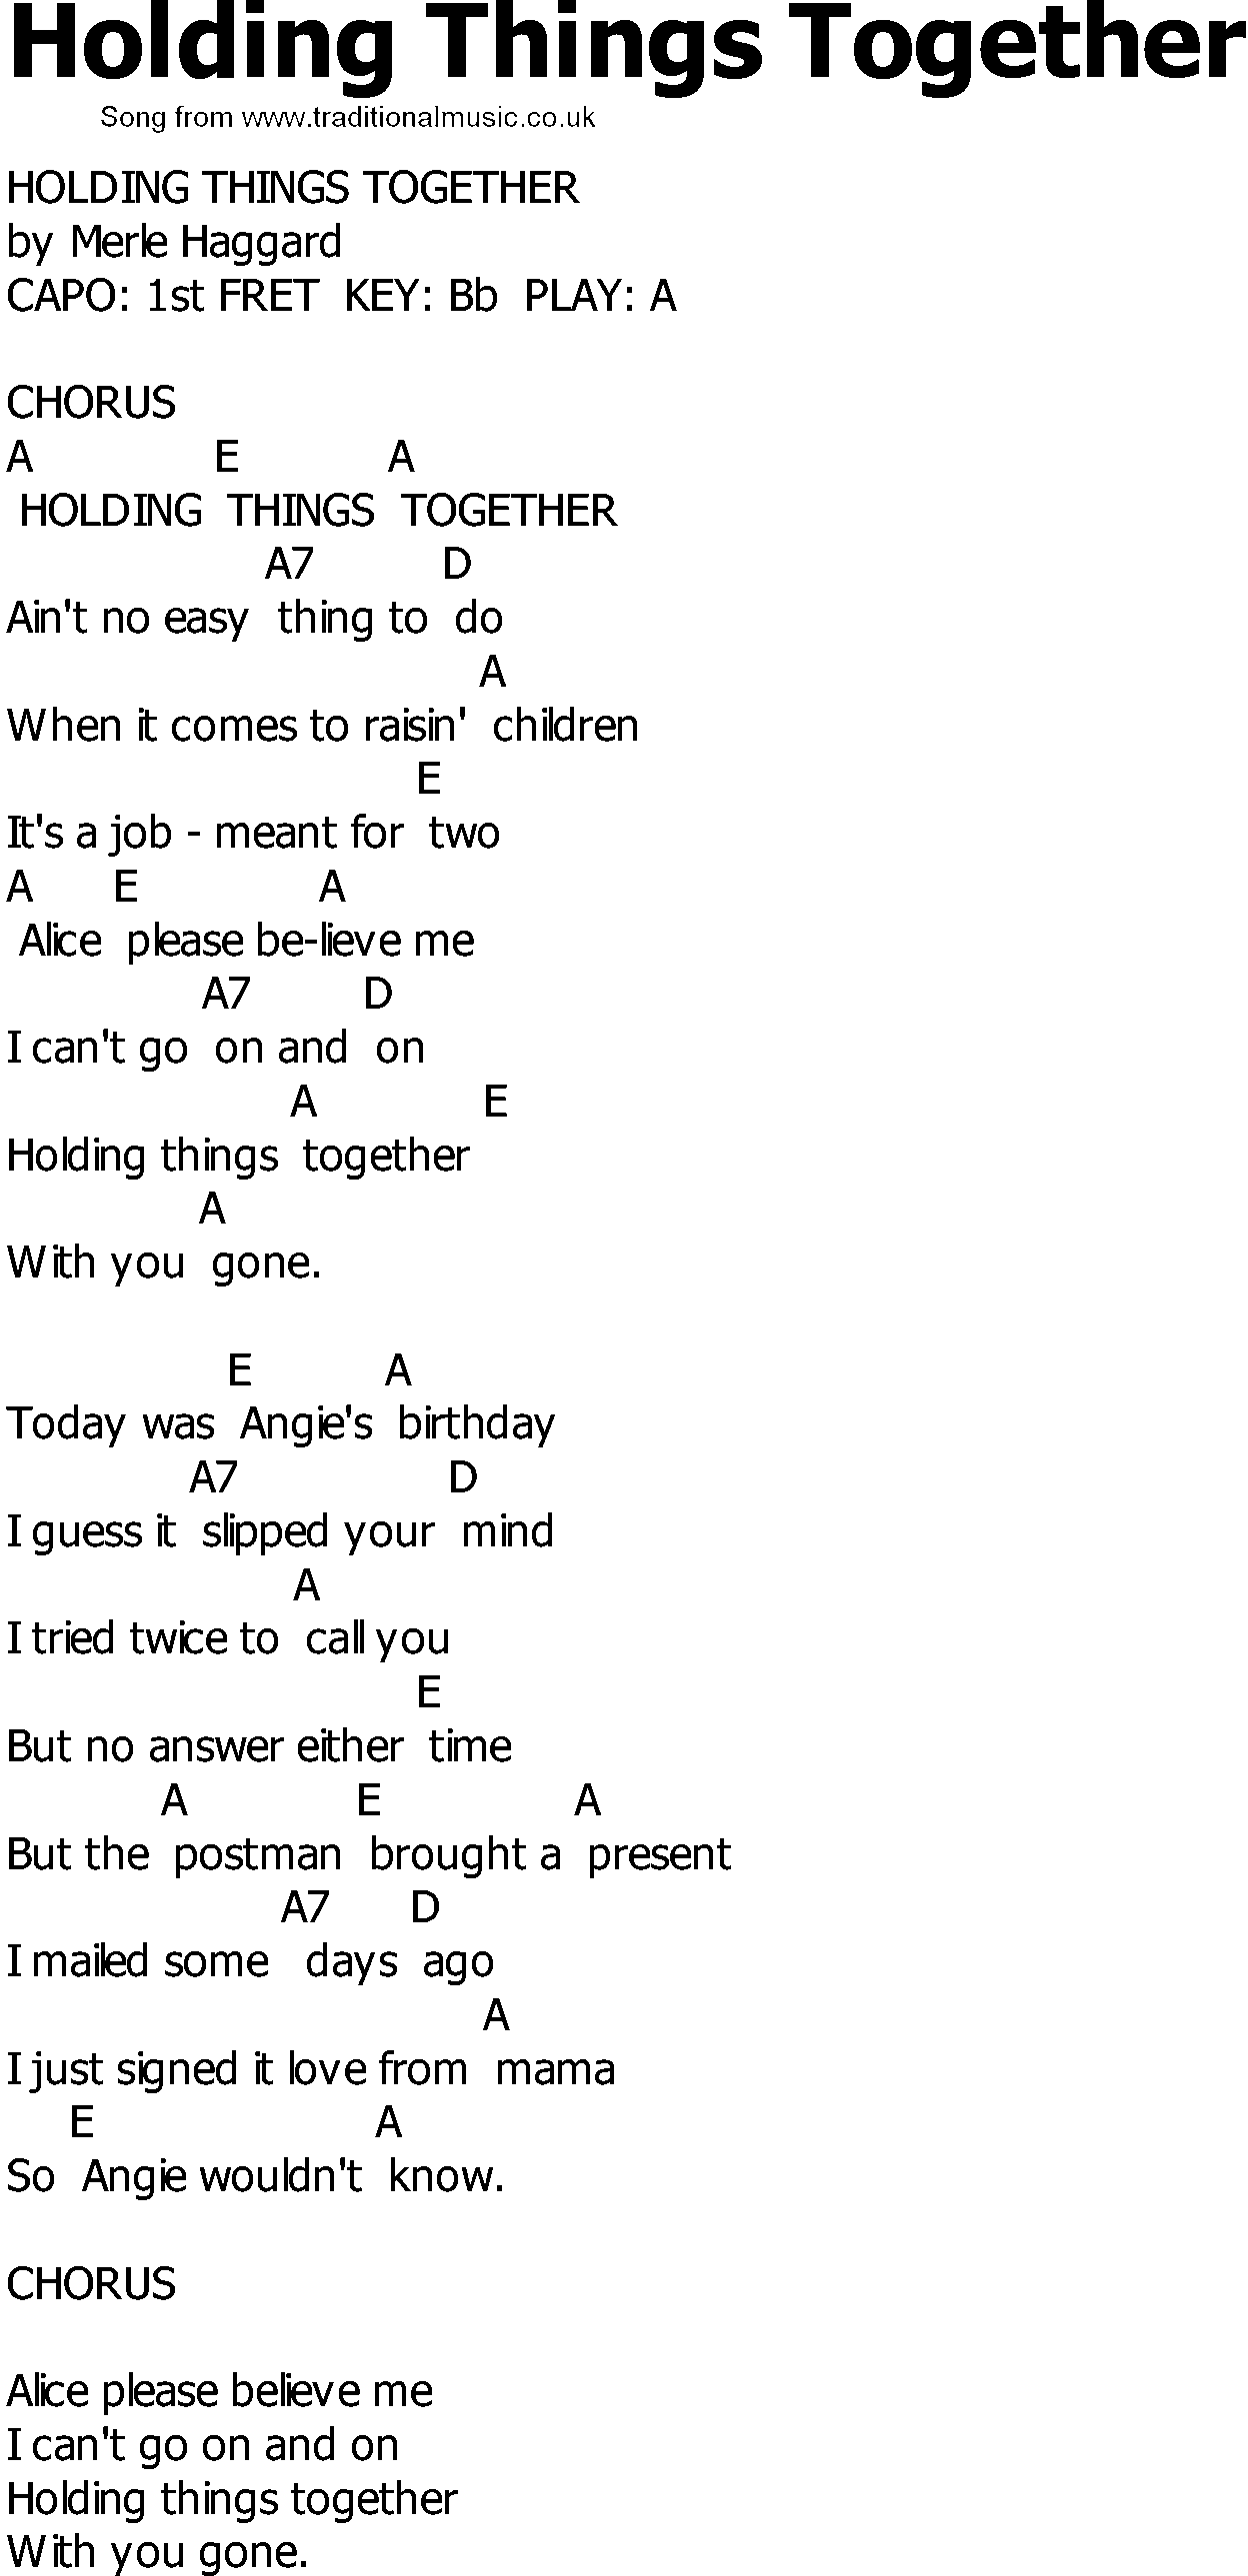 Old Country song lyrics with chords - Holding Things Together